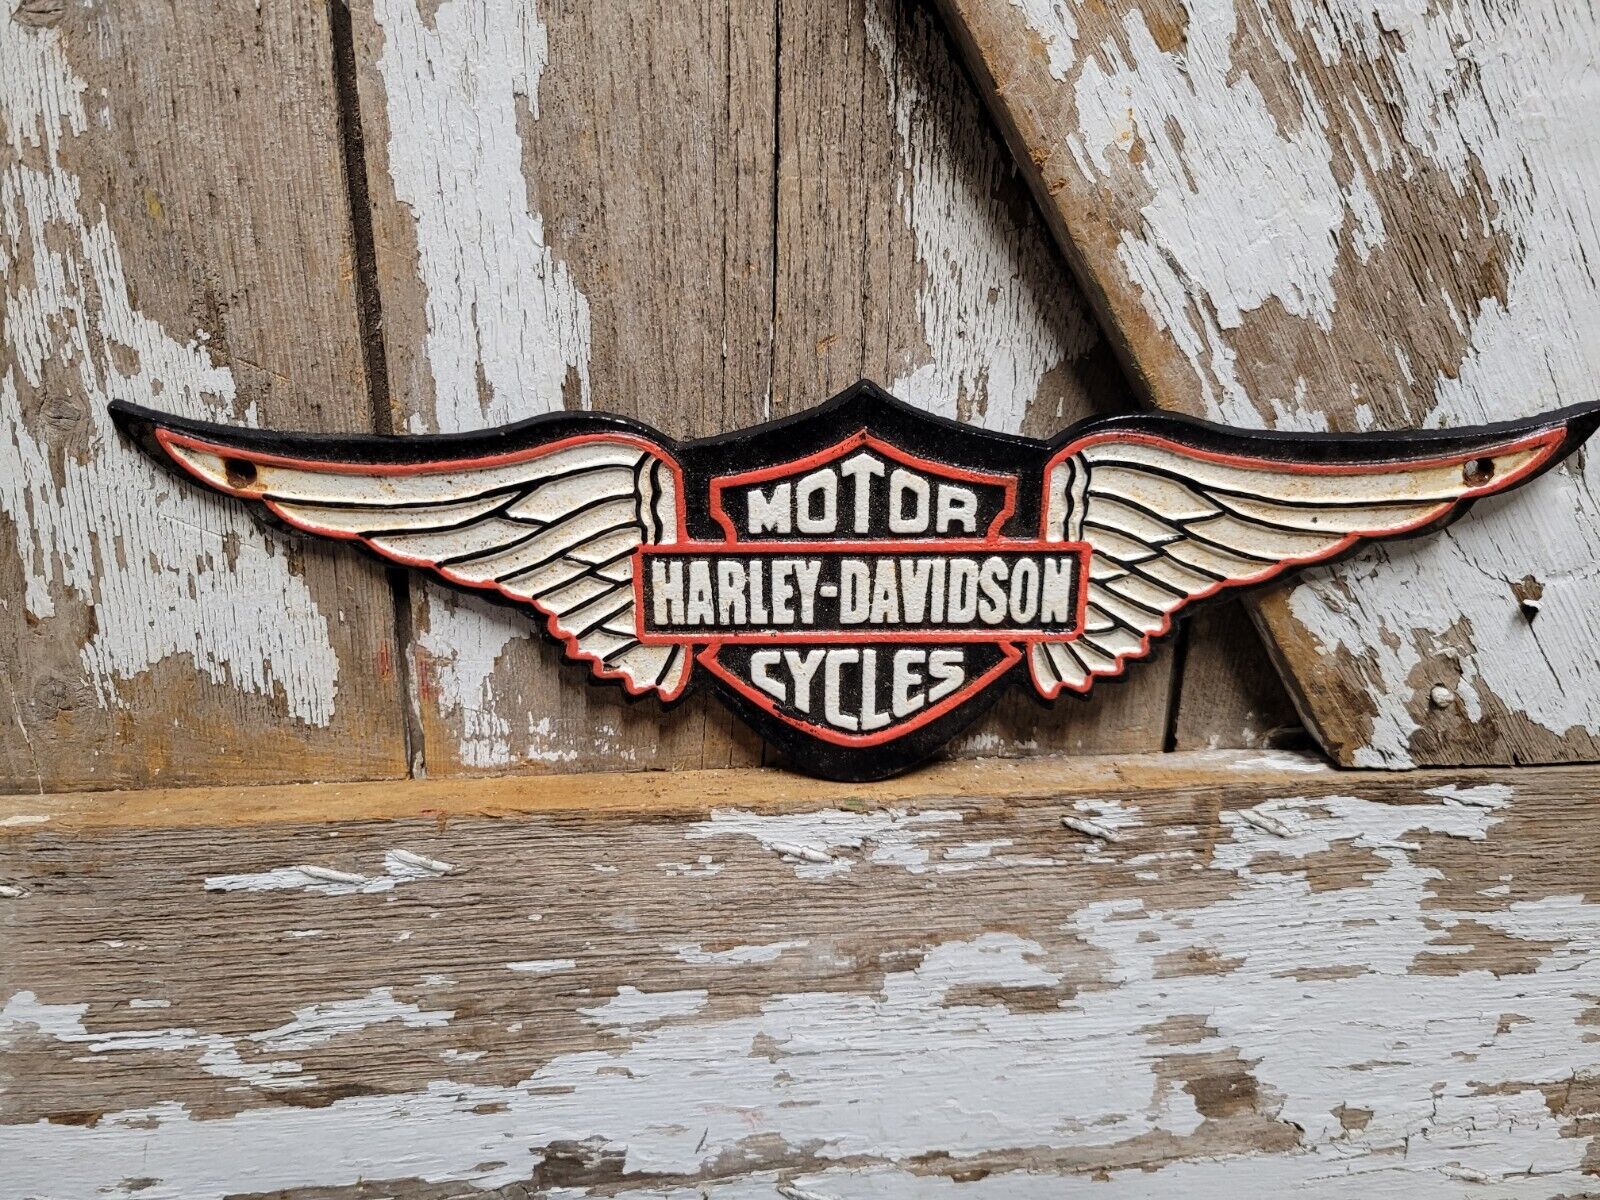 VINTAGE HARLEY DAVIDSON SIGN CAST IRON METAL MOTORCYCLE ADVERTISING WING CYCLES